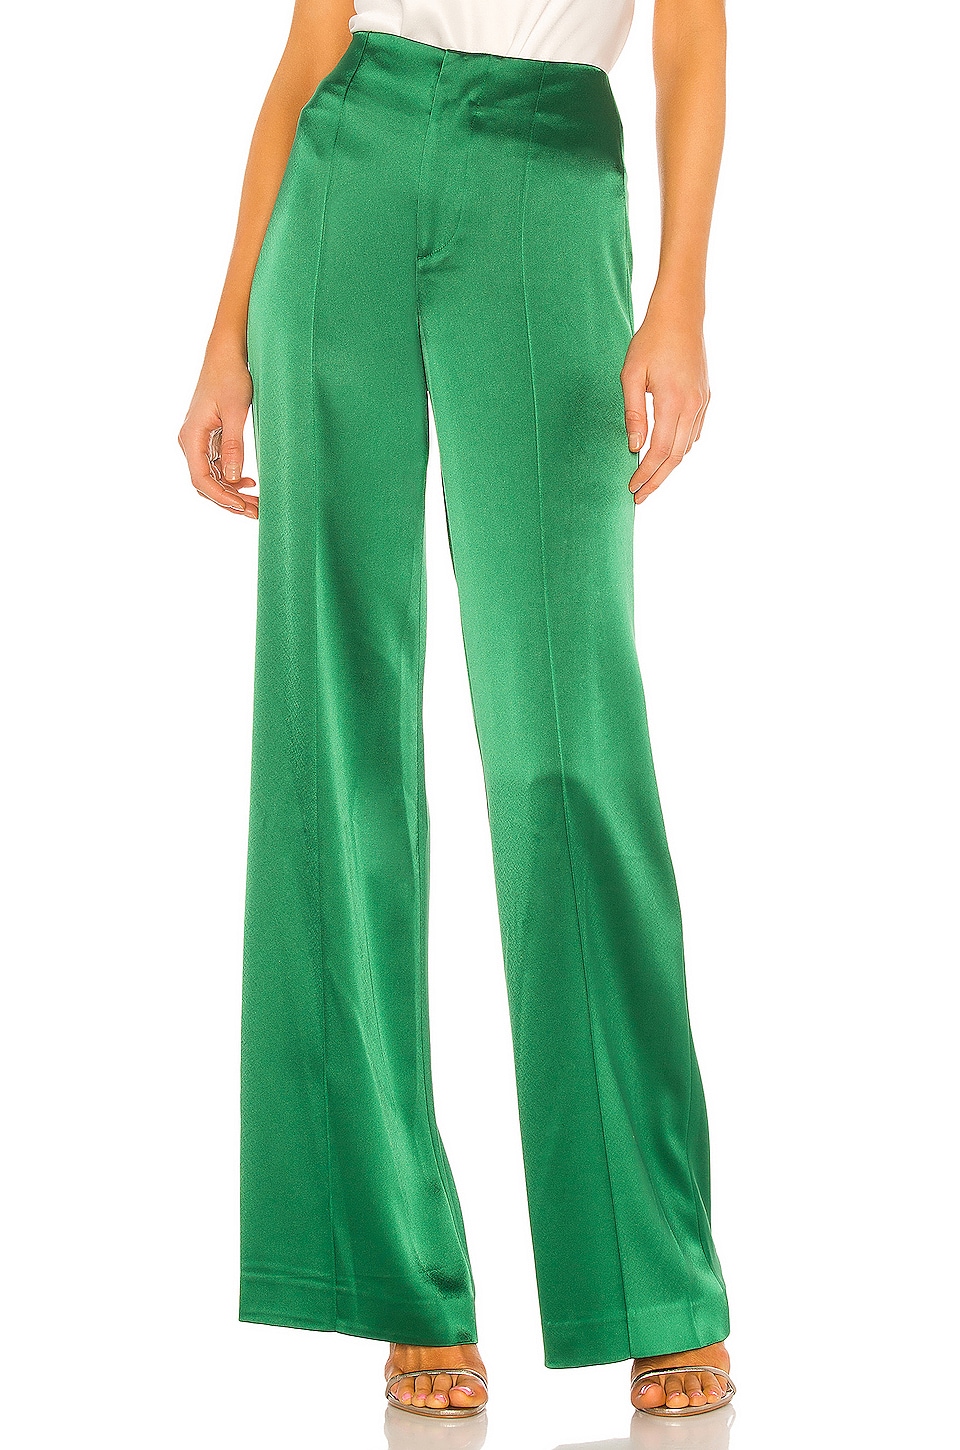 alice and olivia dylan high waisted pants